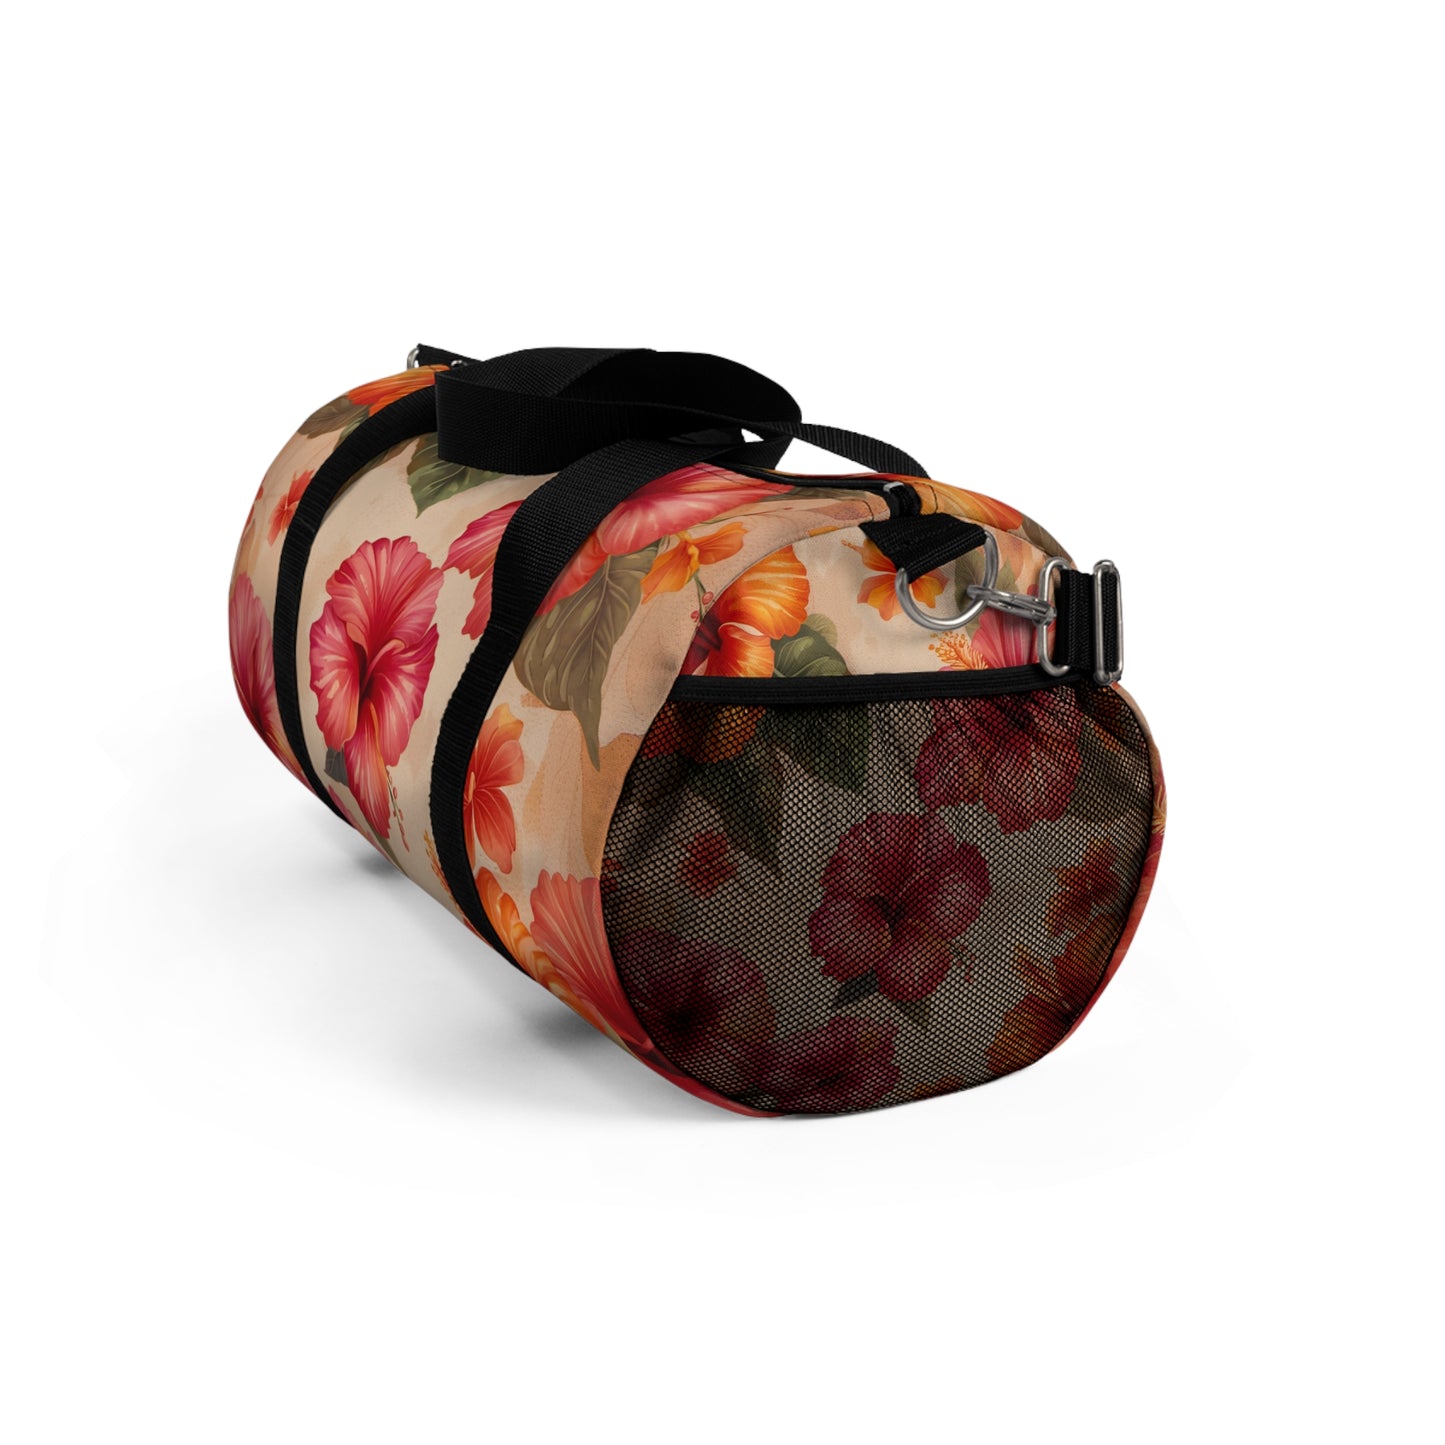 Tropical Themed Travel Accessories and Bags, Hibiscus Flowers Print Duffle Bag